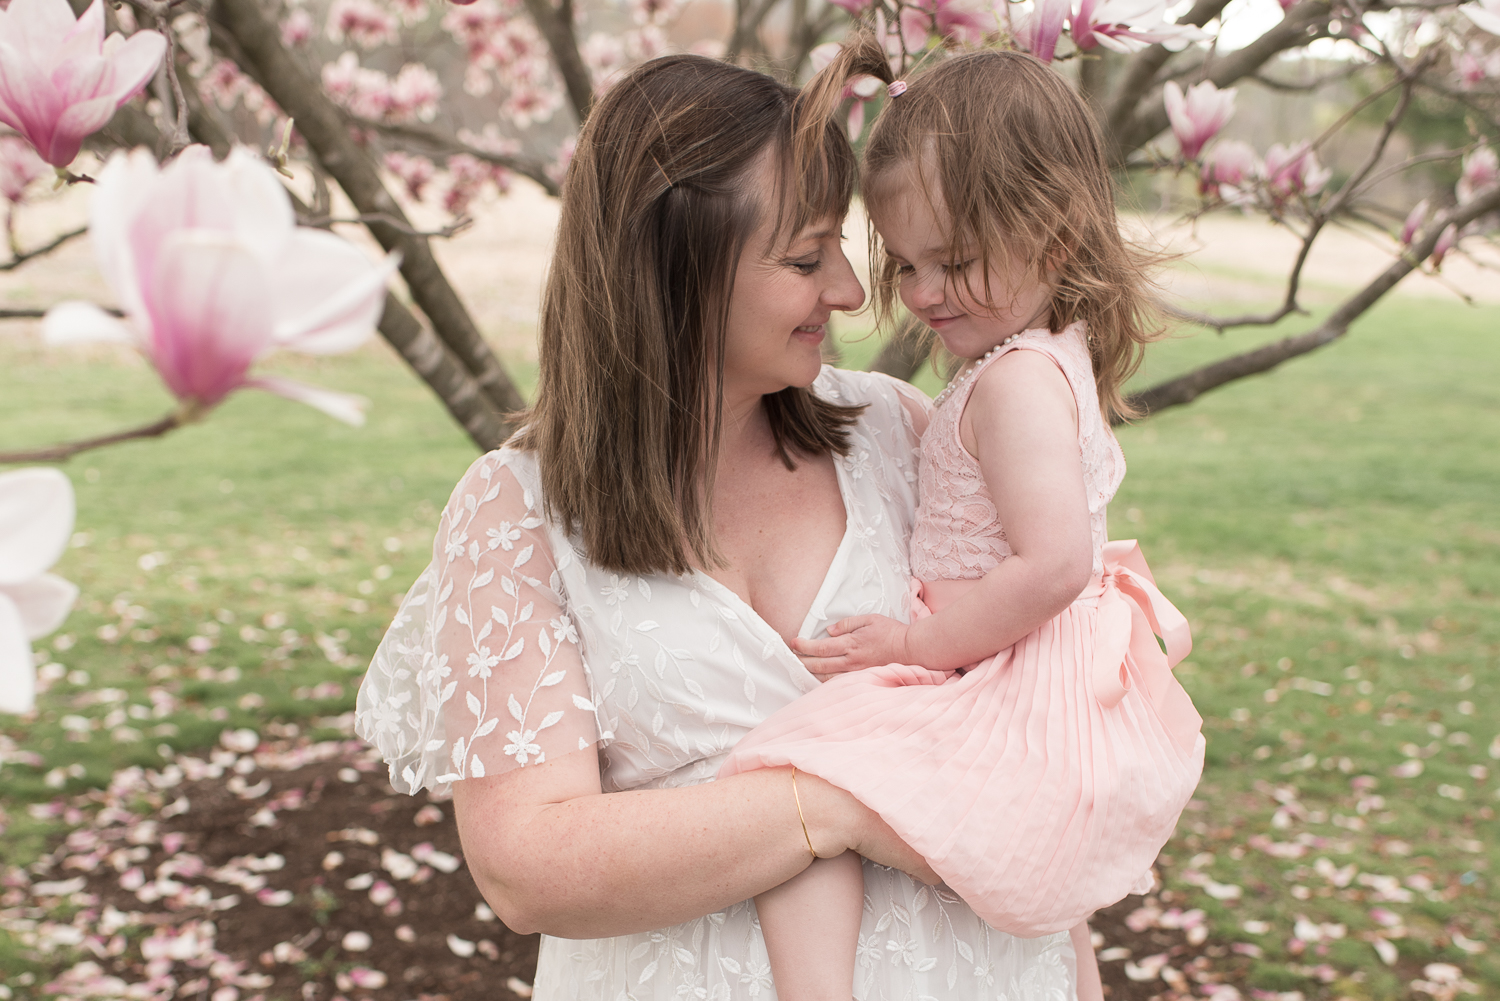 Pregnant woman in white dress with young daughter in pink dress